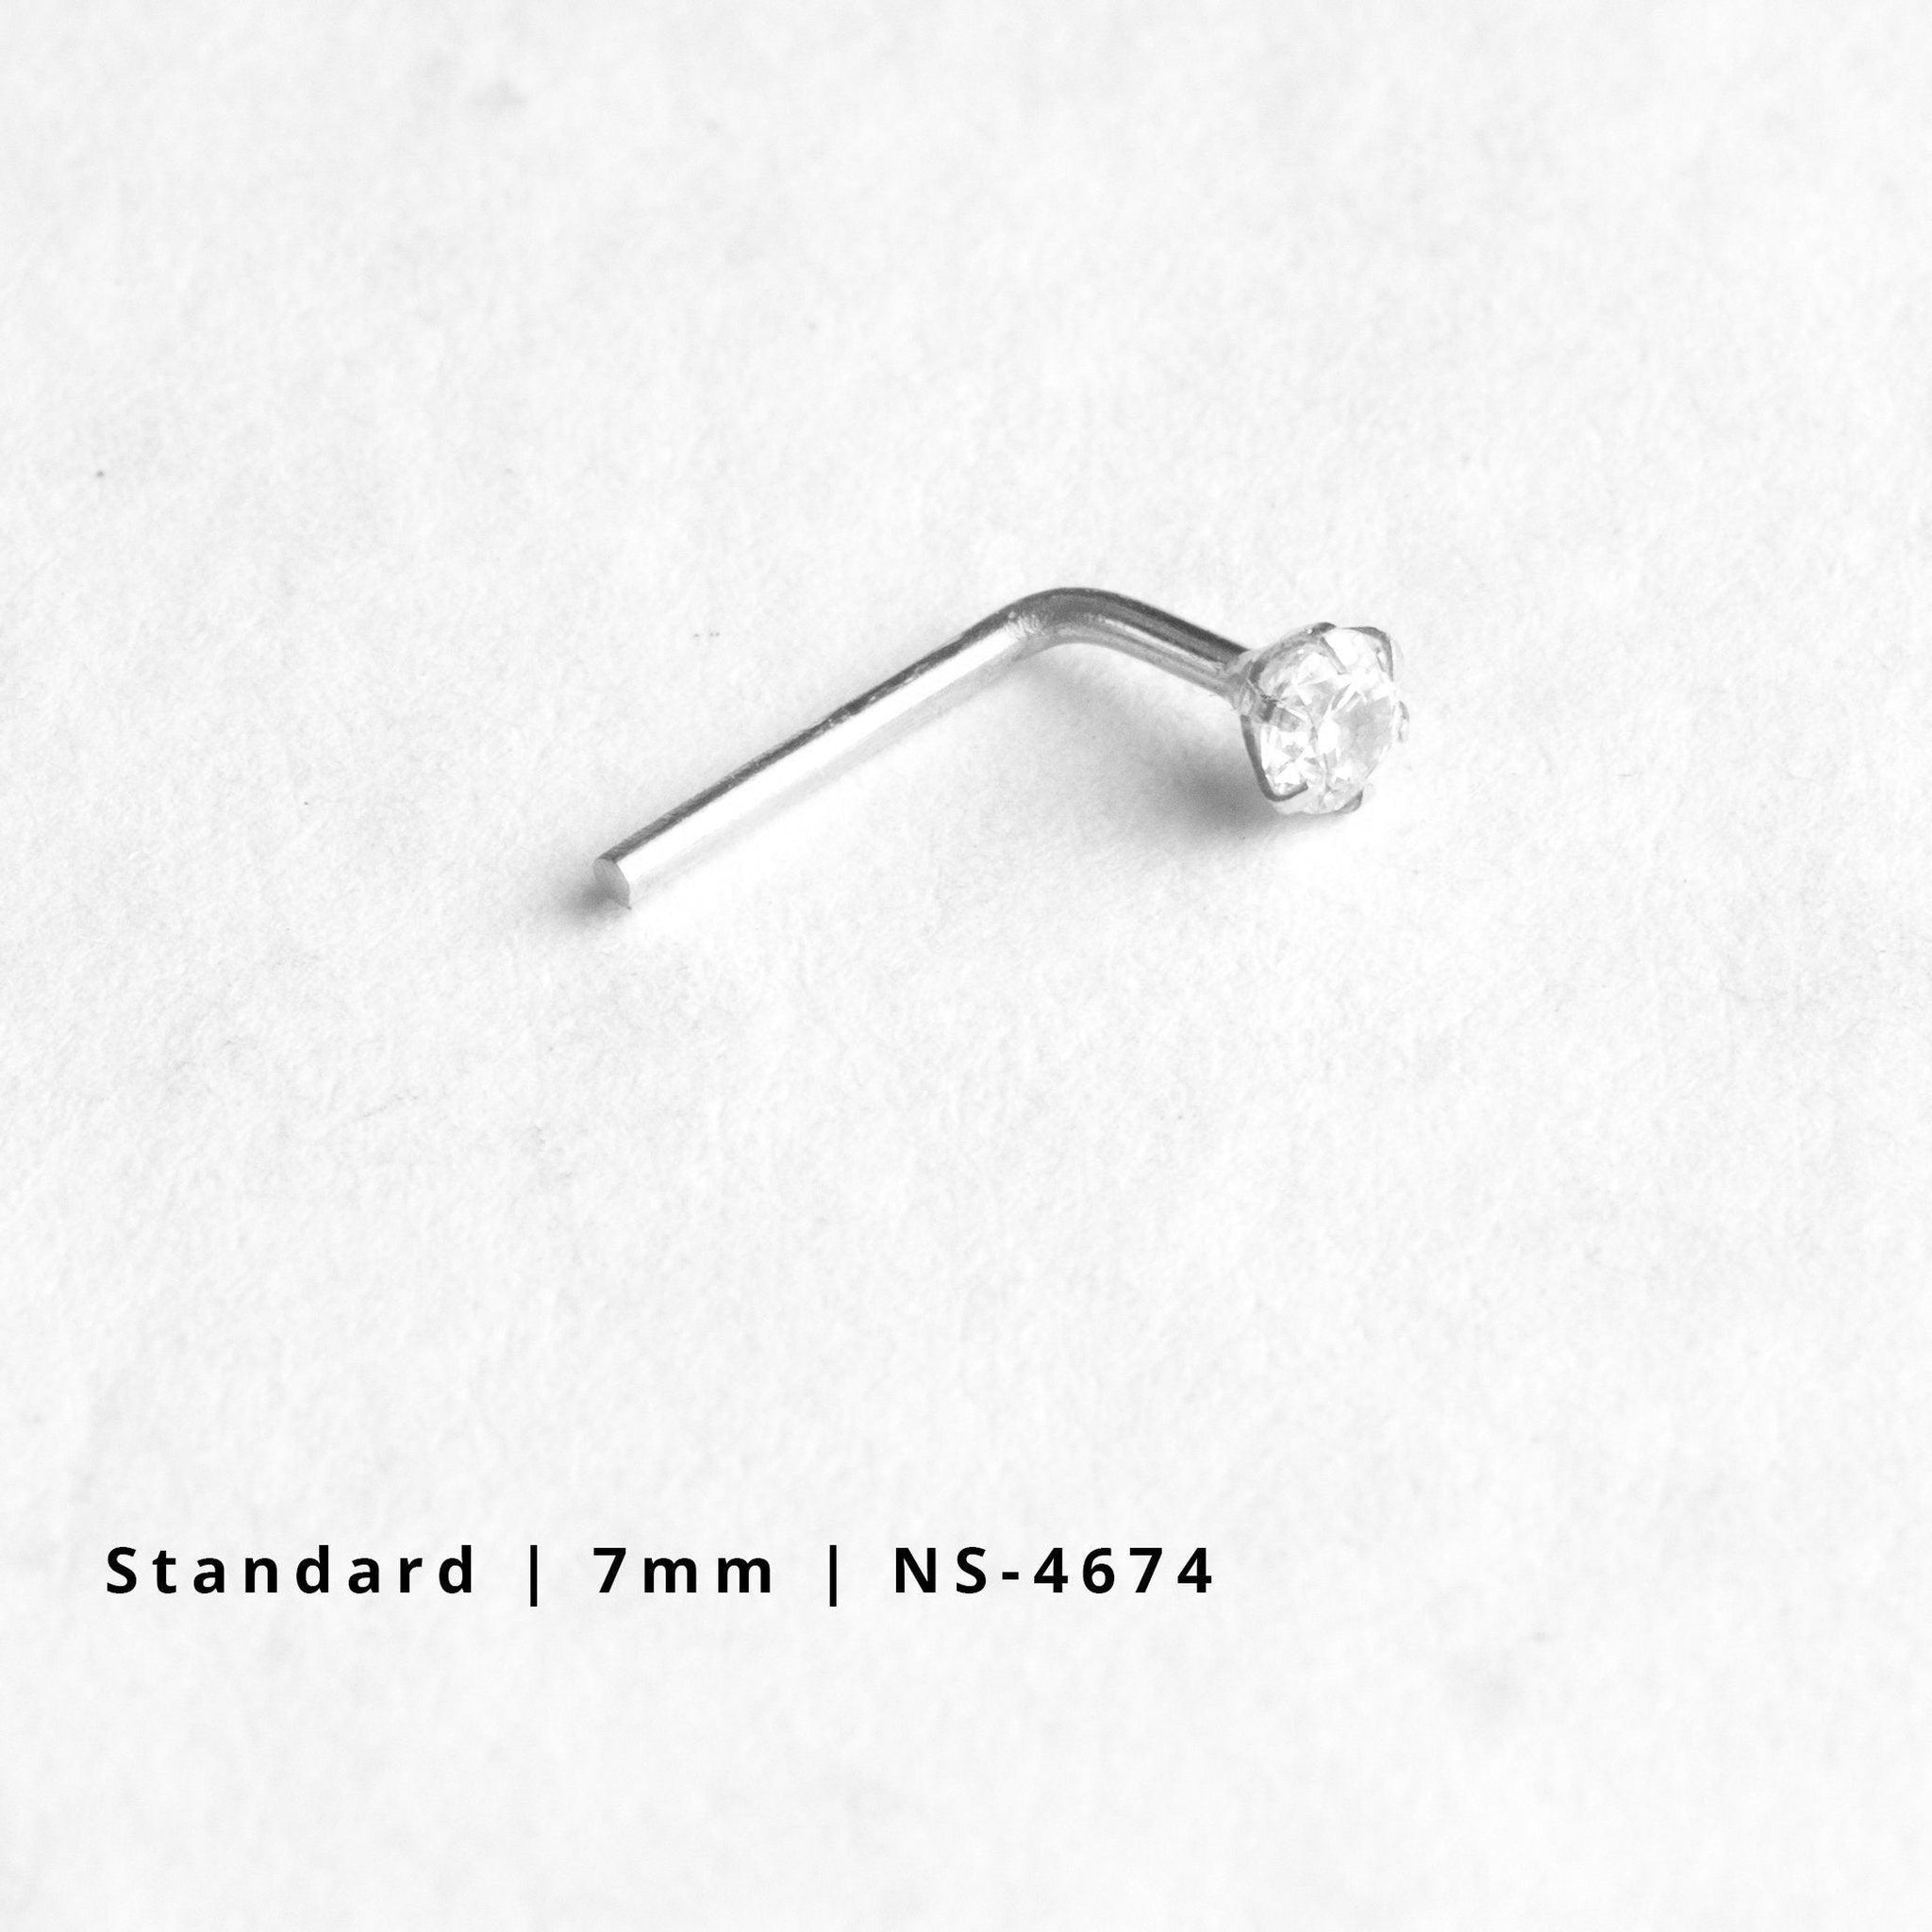 18ct Gold Nose Stud L-Shaped back with a Cubic Zirconia Stone (2mm - 4.5mm)